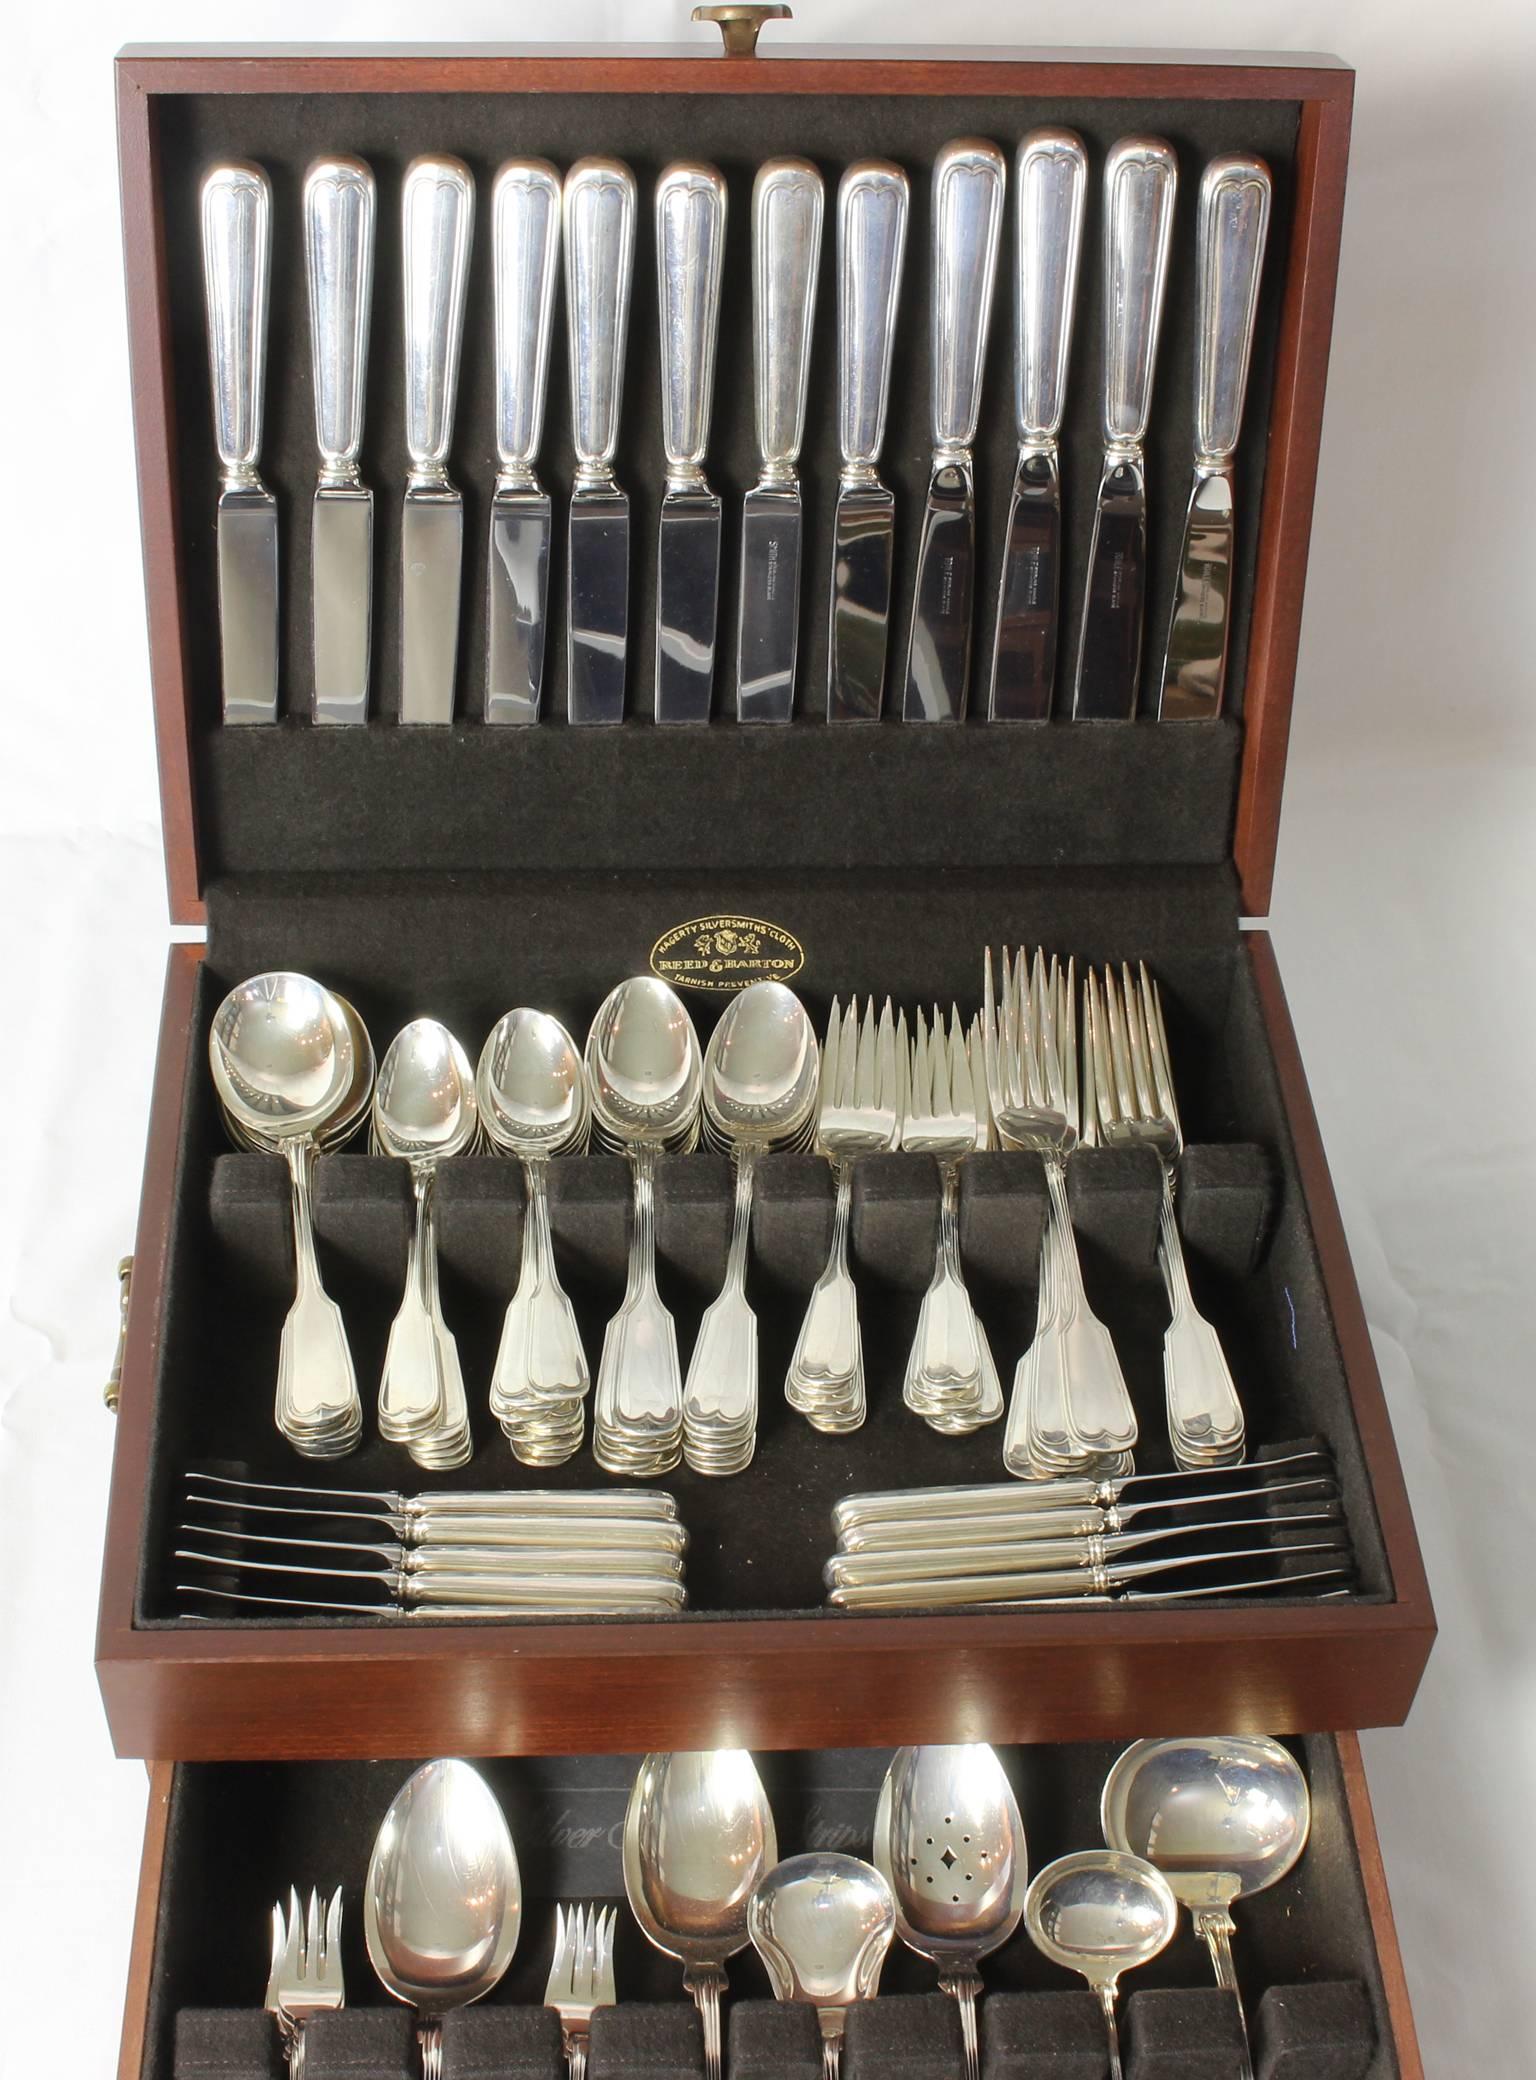 A large set of mid-20th century sterling flatware, service for 12, by Massachusetts
silversmith Frank Smith, in the fiddle and thread pattern. It is comprised of
12 dinner forks, salad forks, knives, pudding spoons, tea spoons and butter knives,